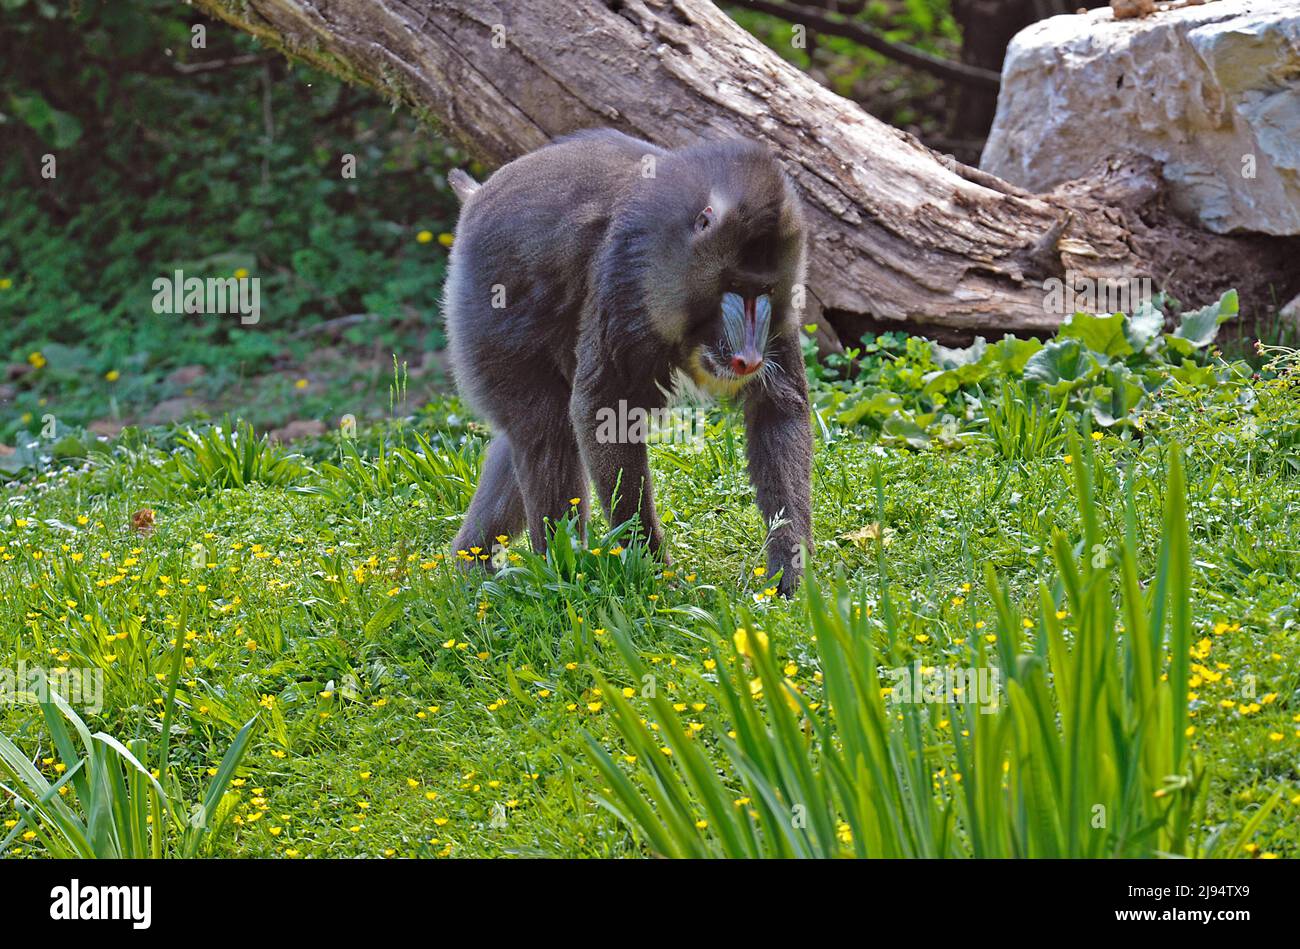 Mandrill Primate Banque D'Images